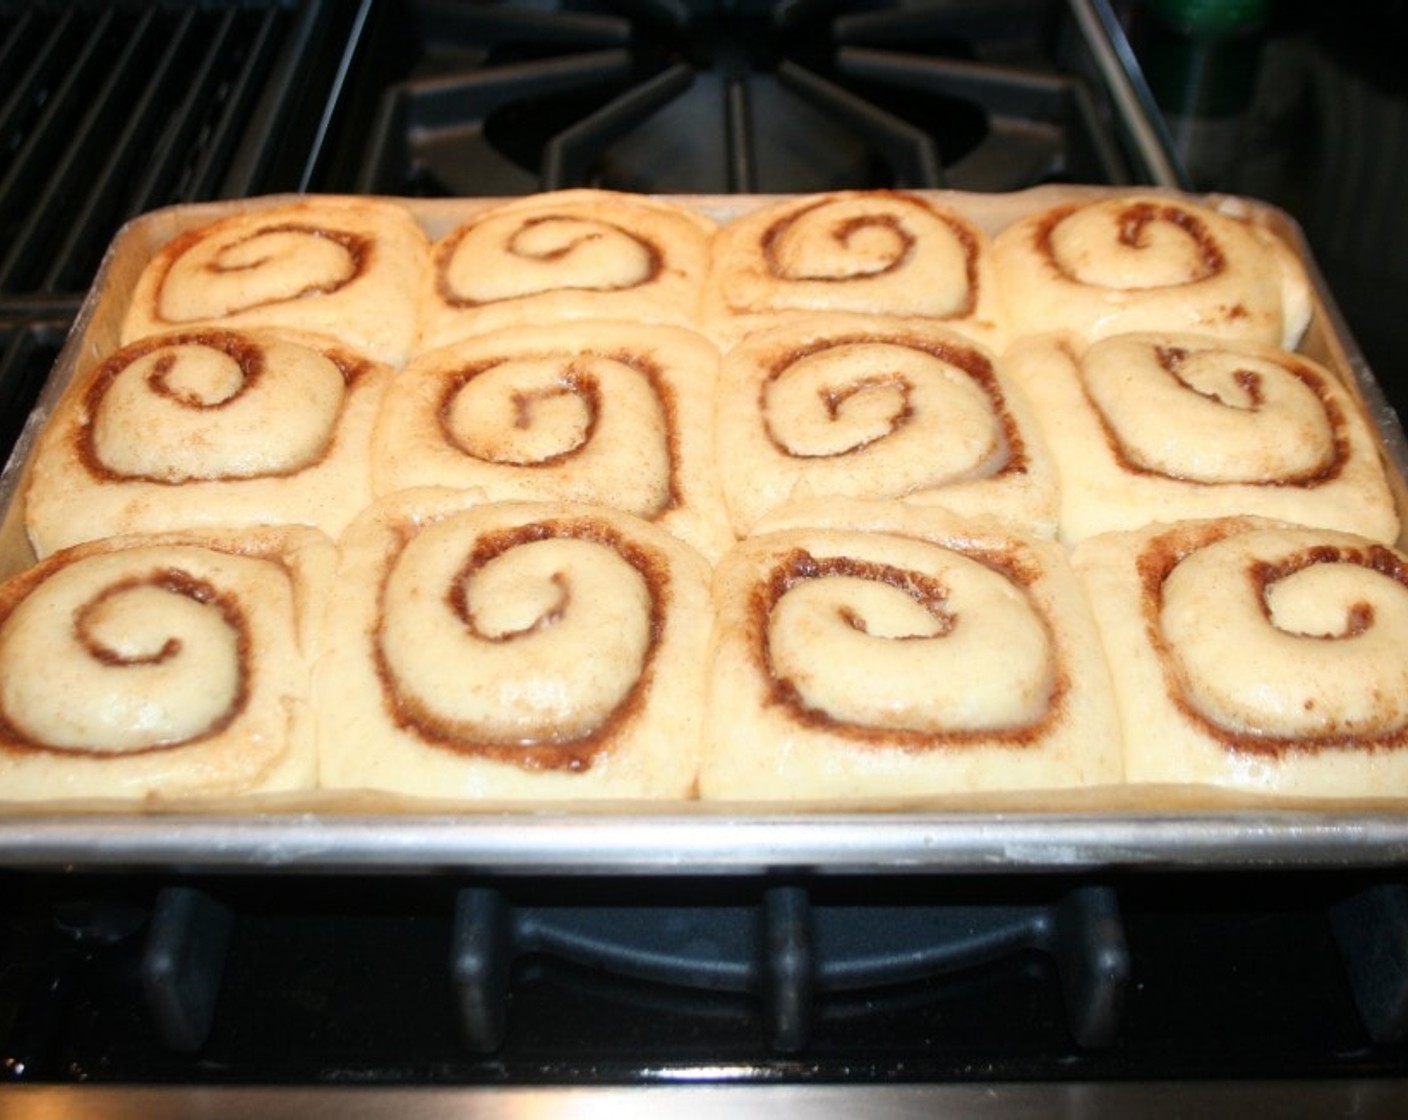 step 7 Place the cinnamon rolls in the pan and let the rolls rise another 1 hour to 1 1/2 hours until they double in size.